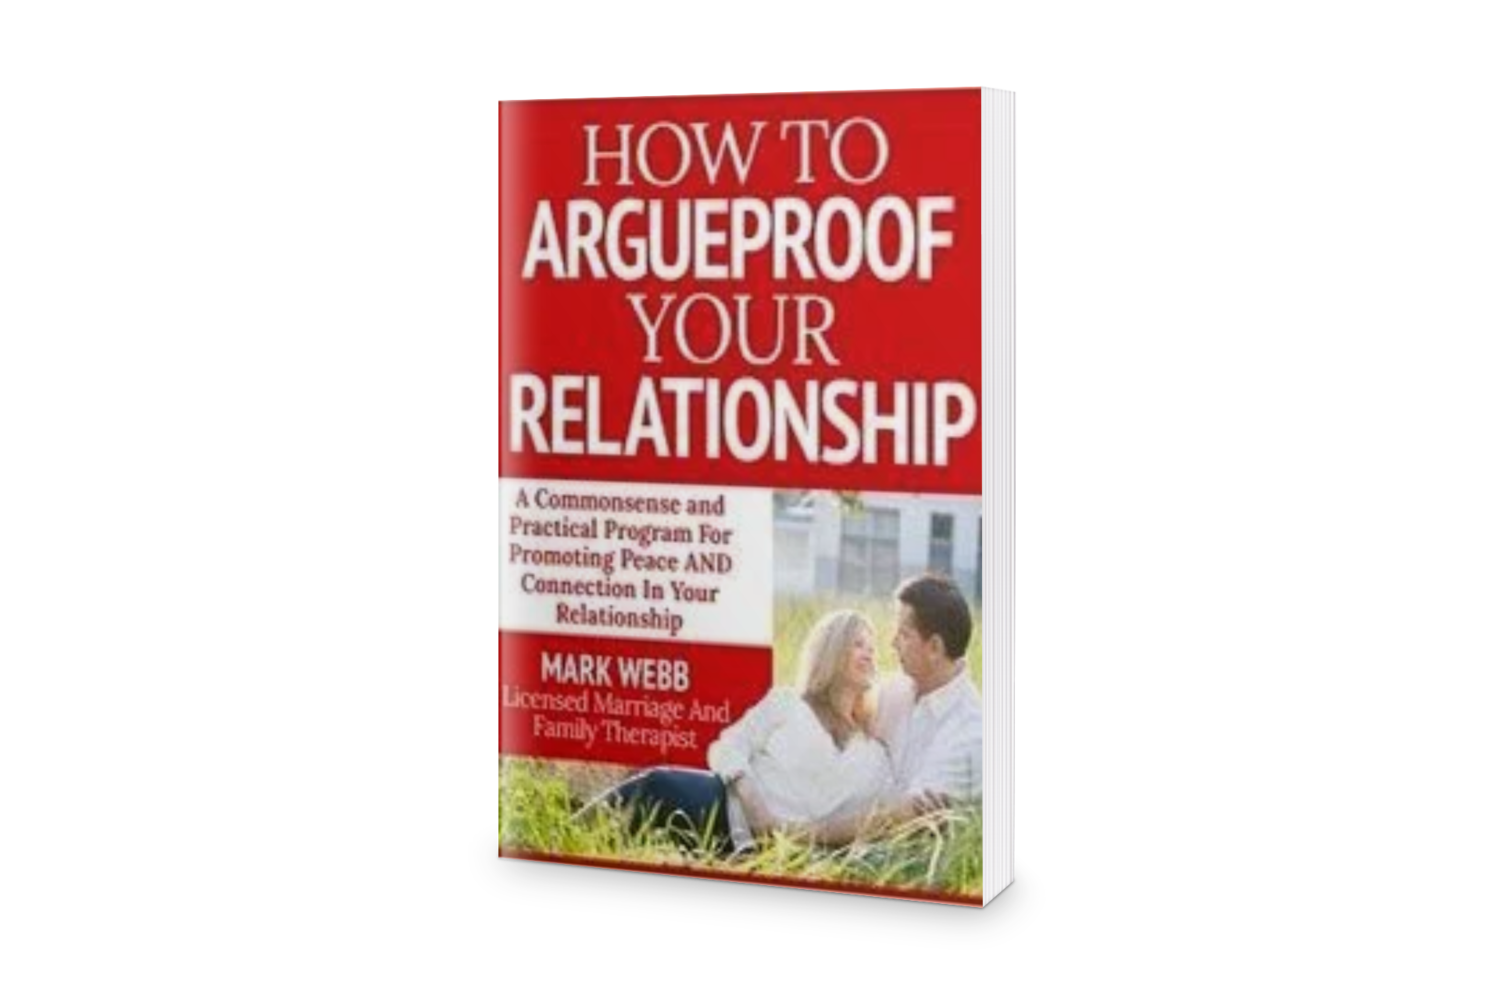 How To Argueproof Your Relationship